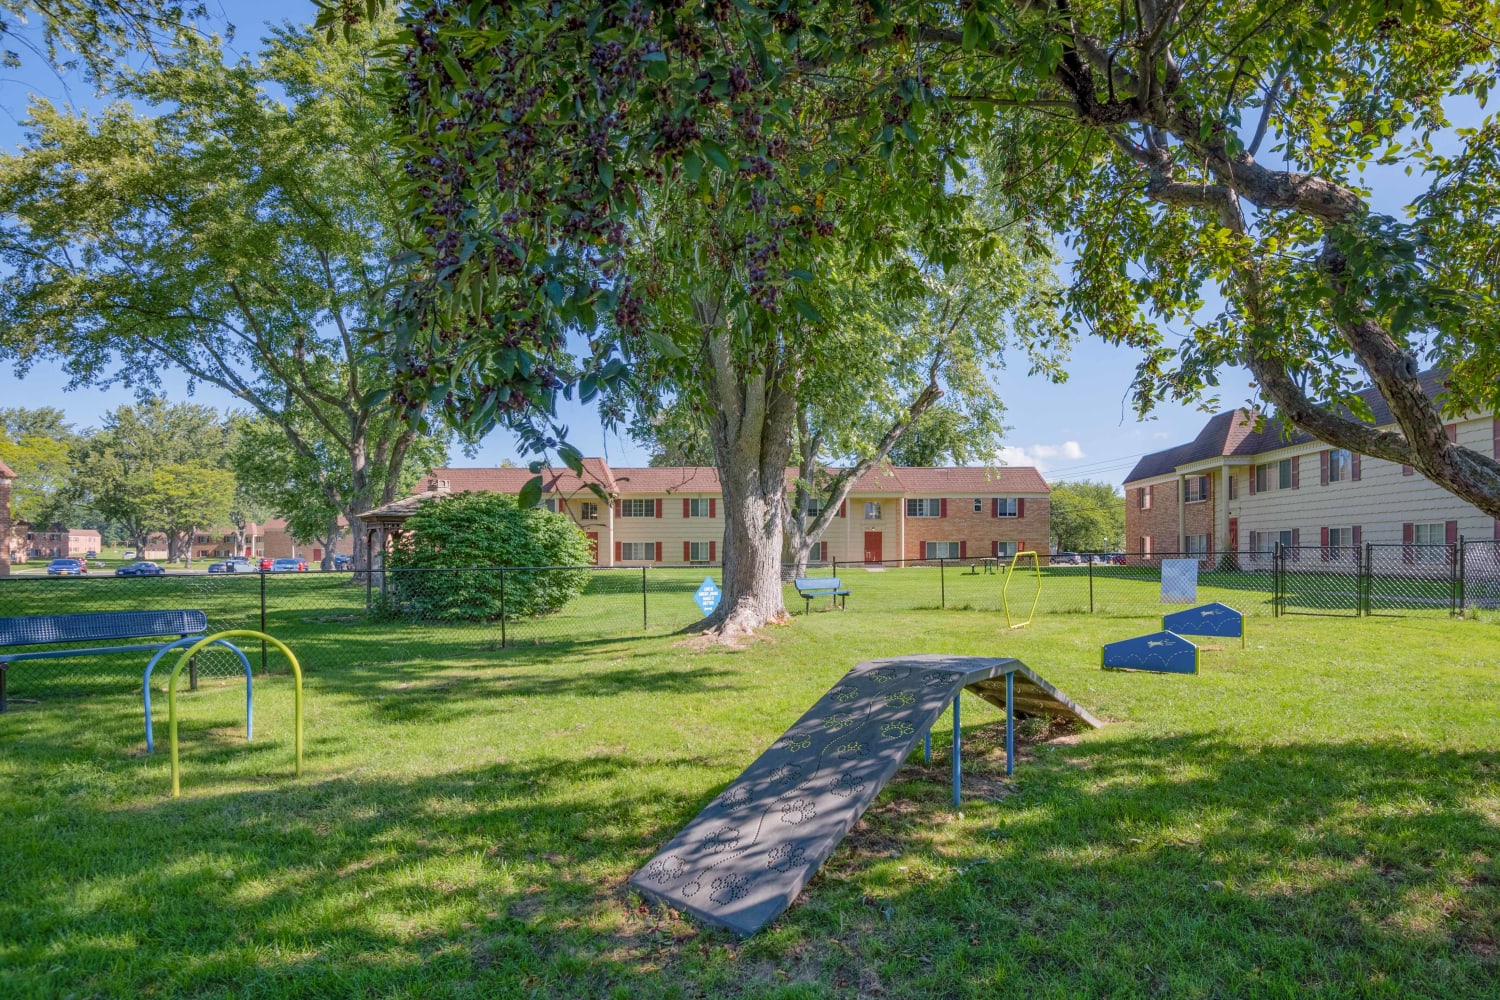 Imperial North Apartments offers a dog park at Imperial North Apartments home in Rochester, New York